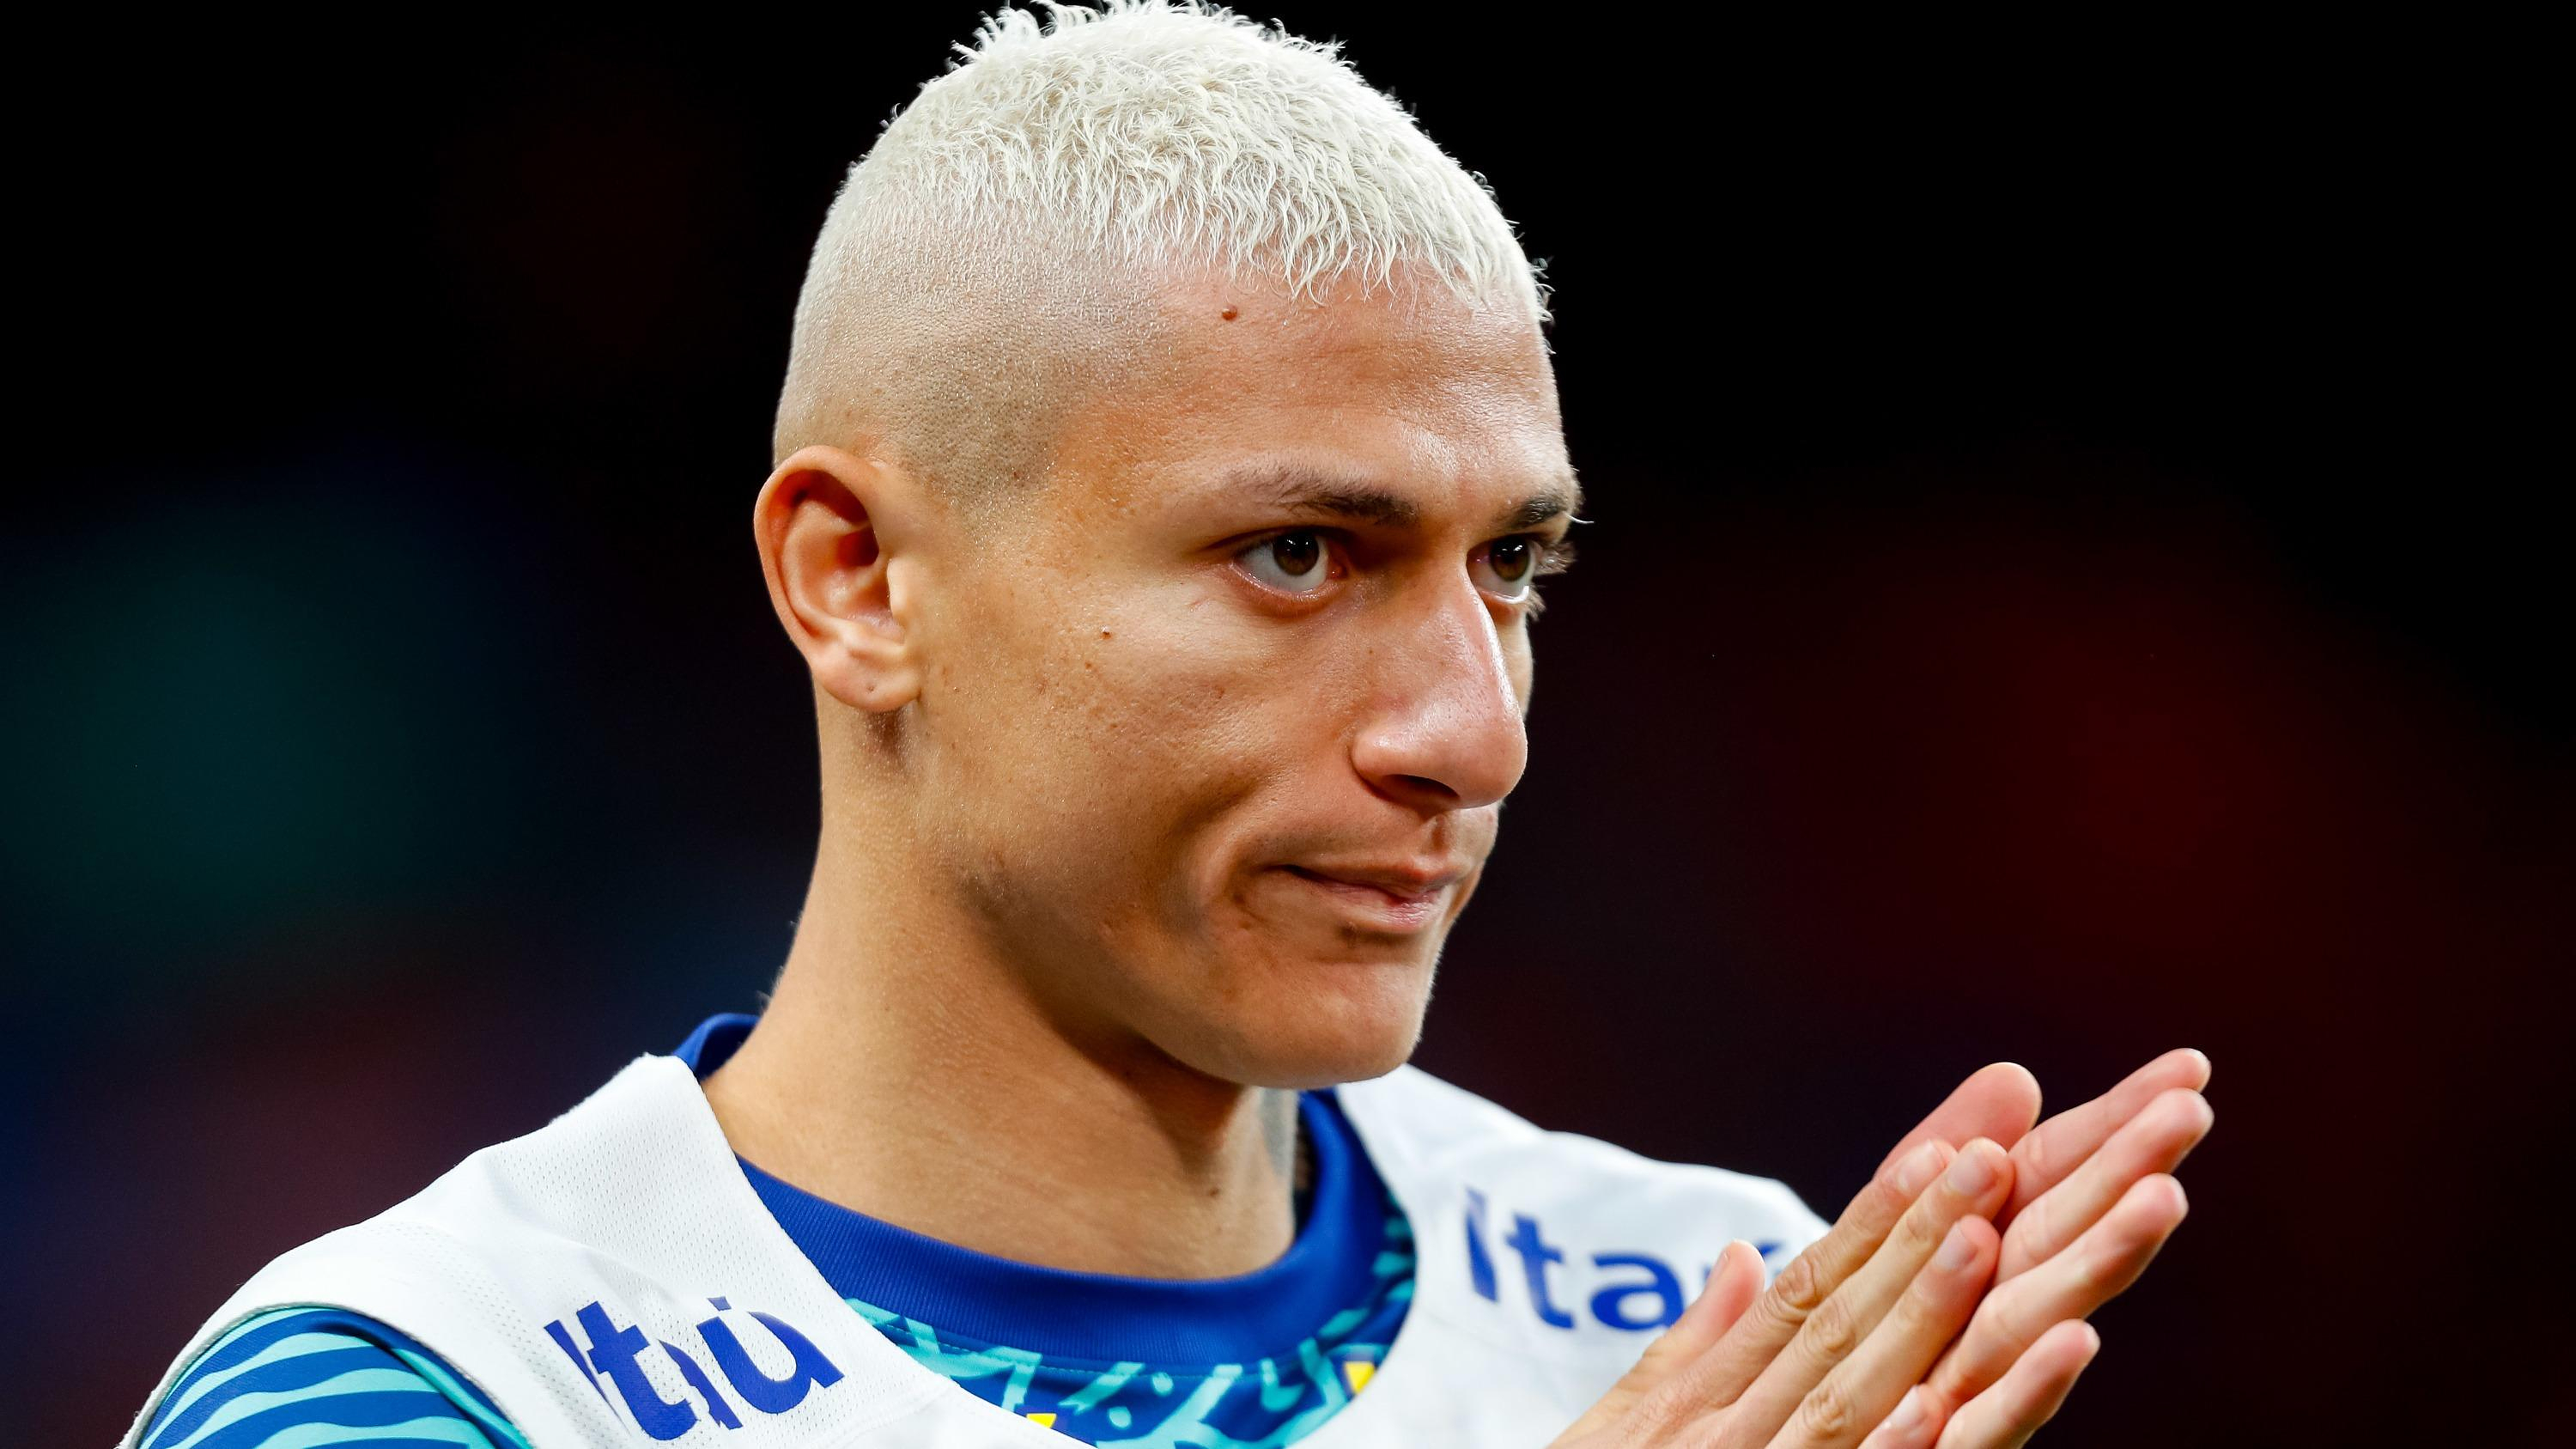 Premier League: “It’s to Richarlison’s credit to have sought help”, greets his coach at Tottenham